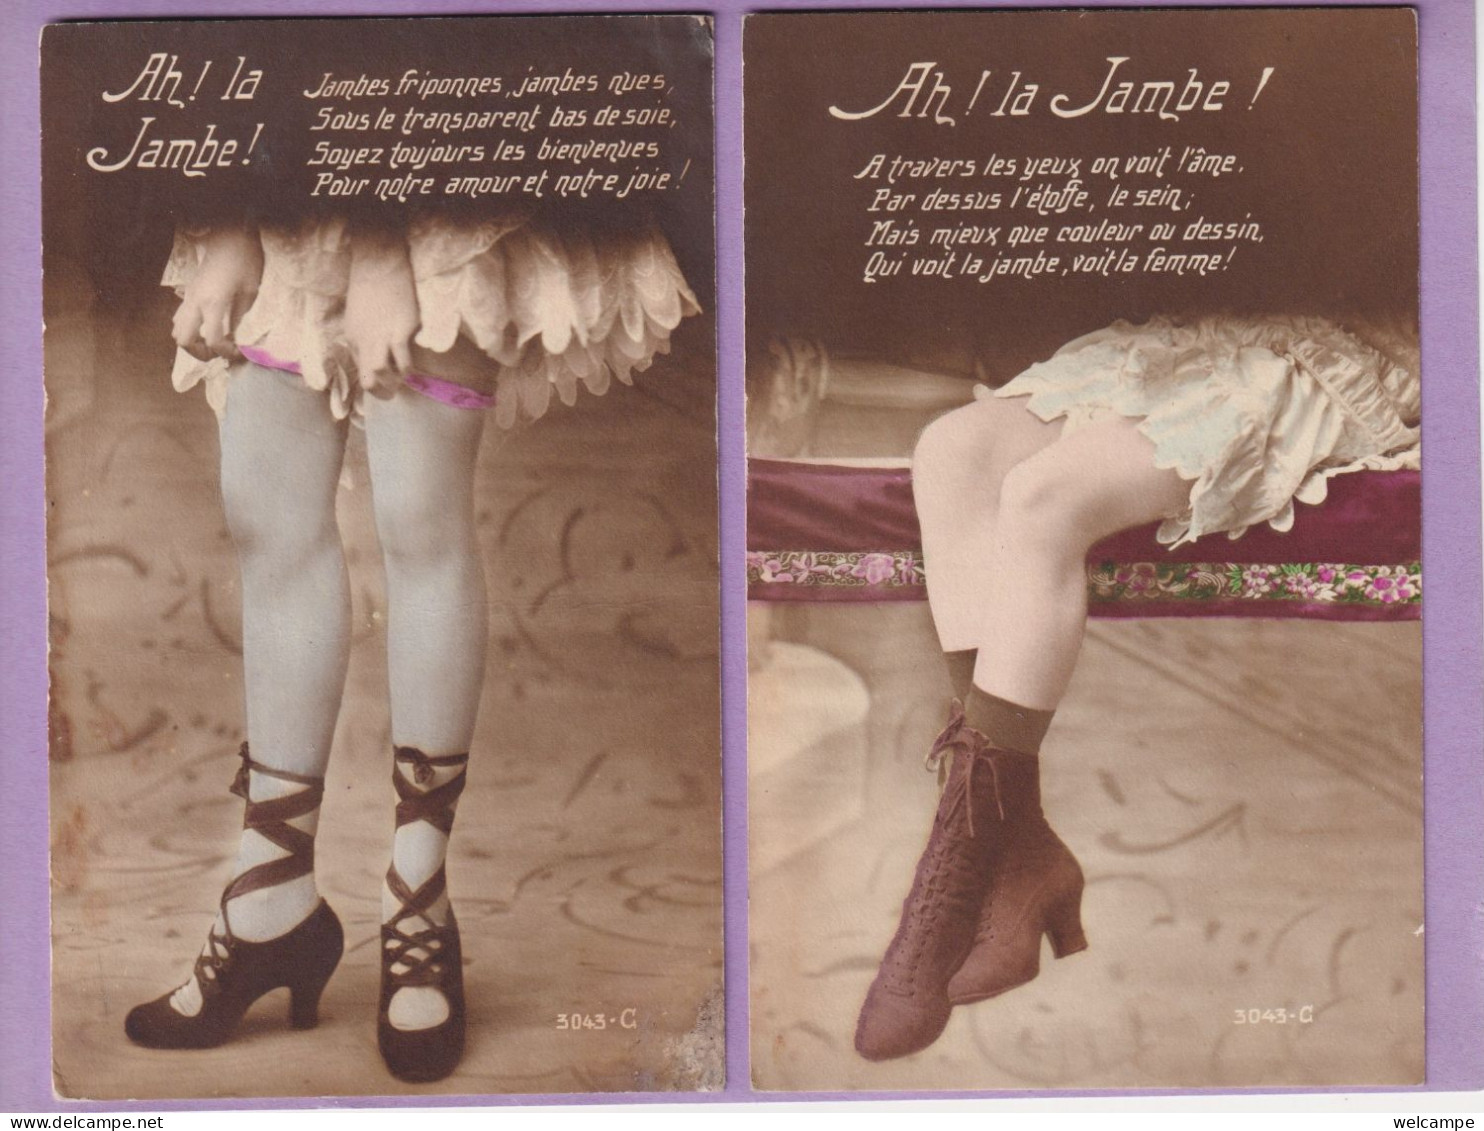 TWO OLD PHOTO POSTCARDS - ' AH LA JAMBE ' - THE LEGS OF A WOMAN - Women